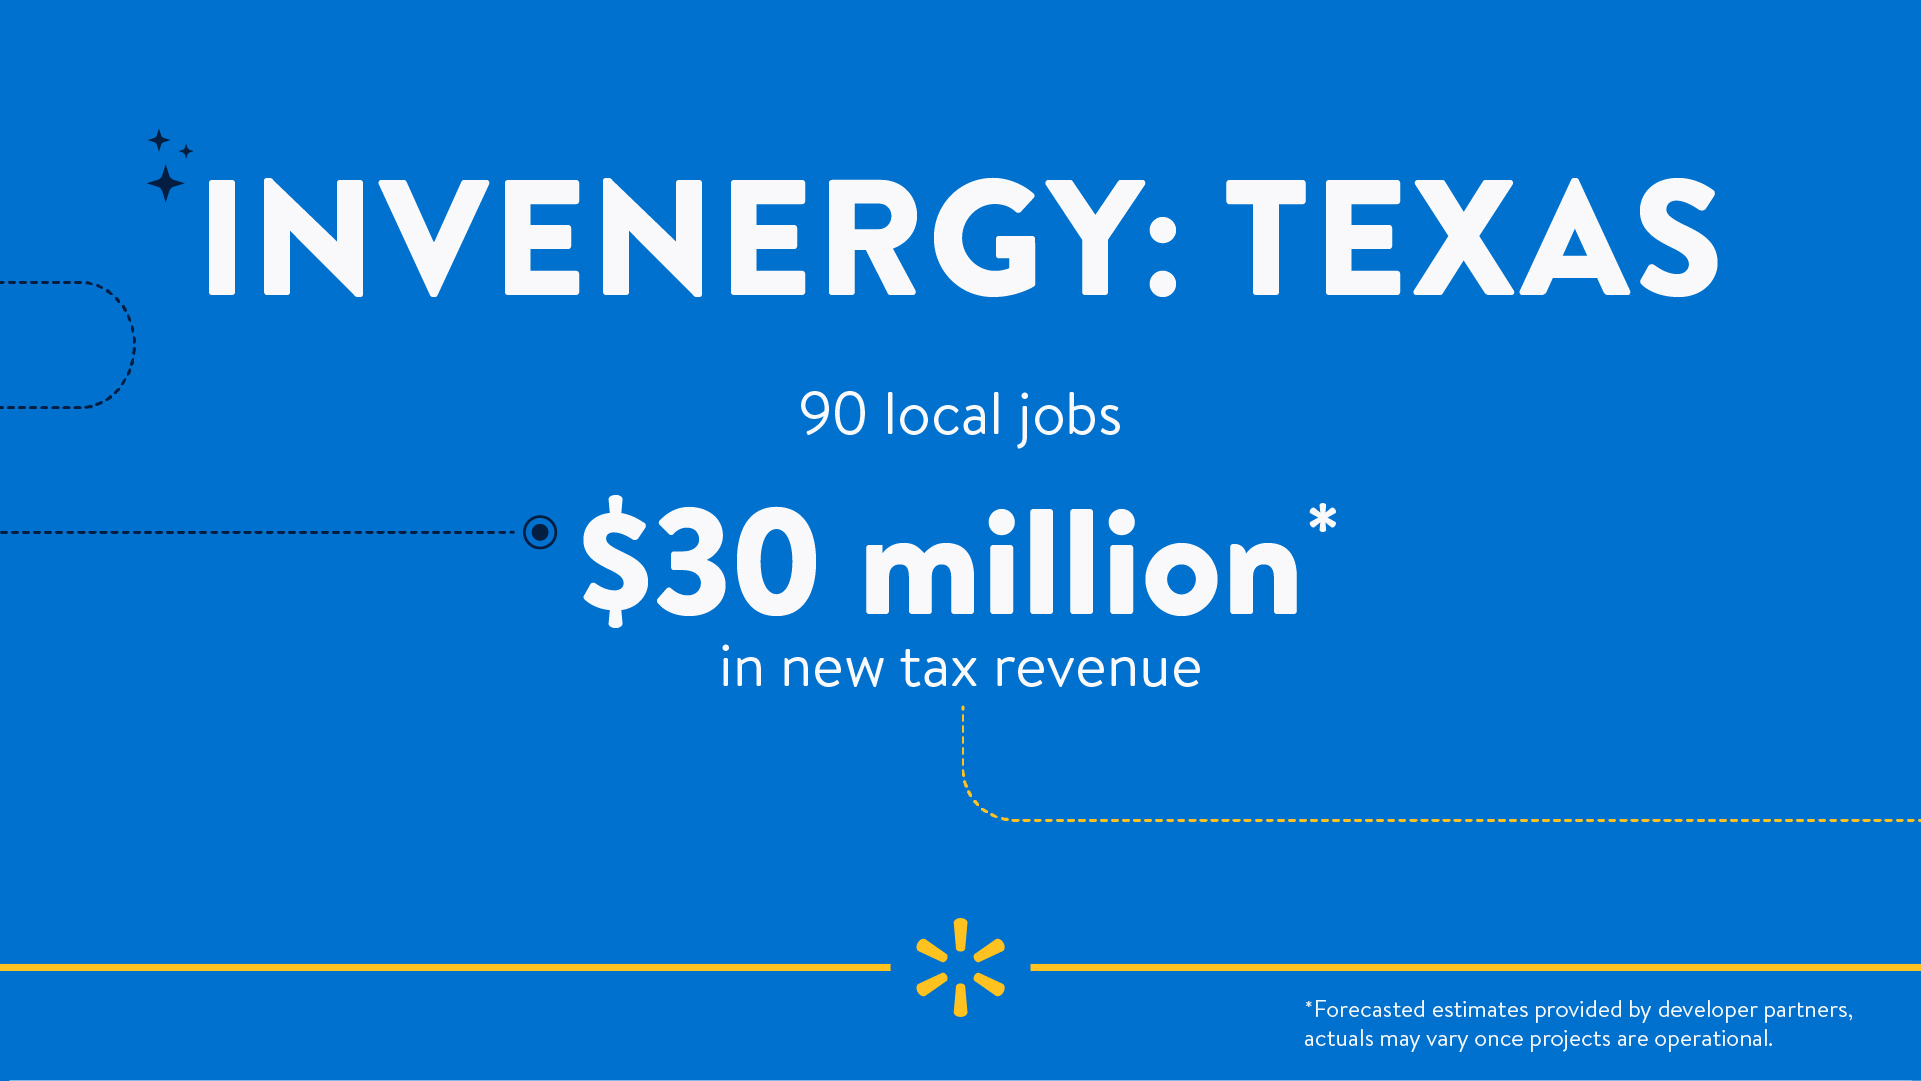 Image reads "Invenergy. 90 local jobs. $30 million* in new tax revenue. *Forecasted estimates provided by developer partners, actuals may vary once projects are operational."